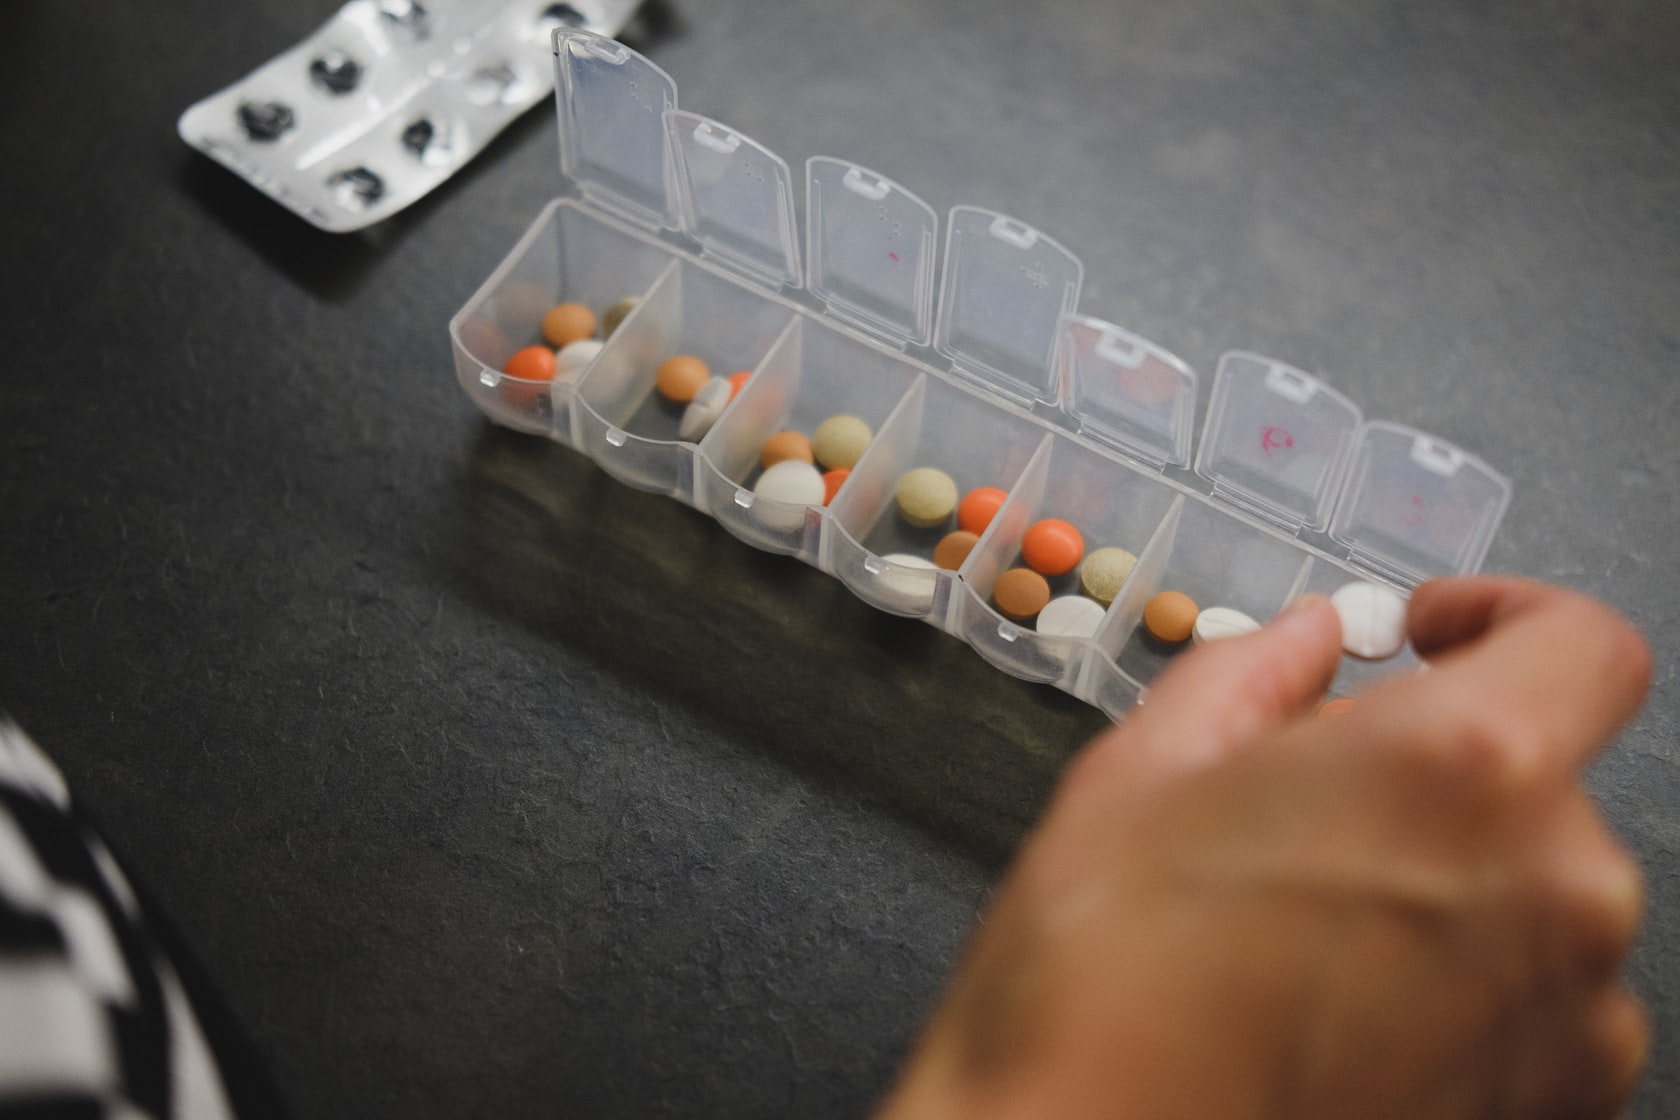 A hand hovers over a pill organiser.